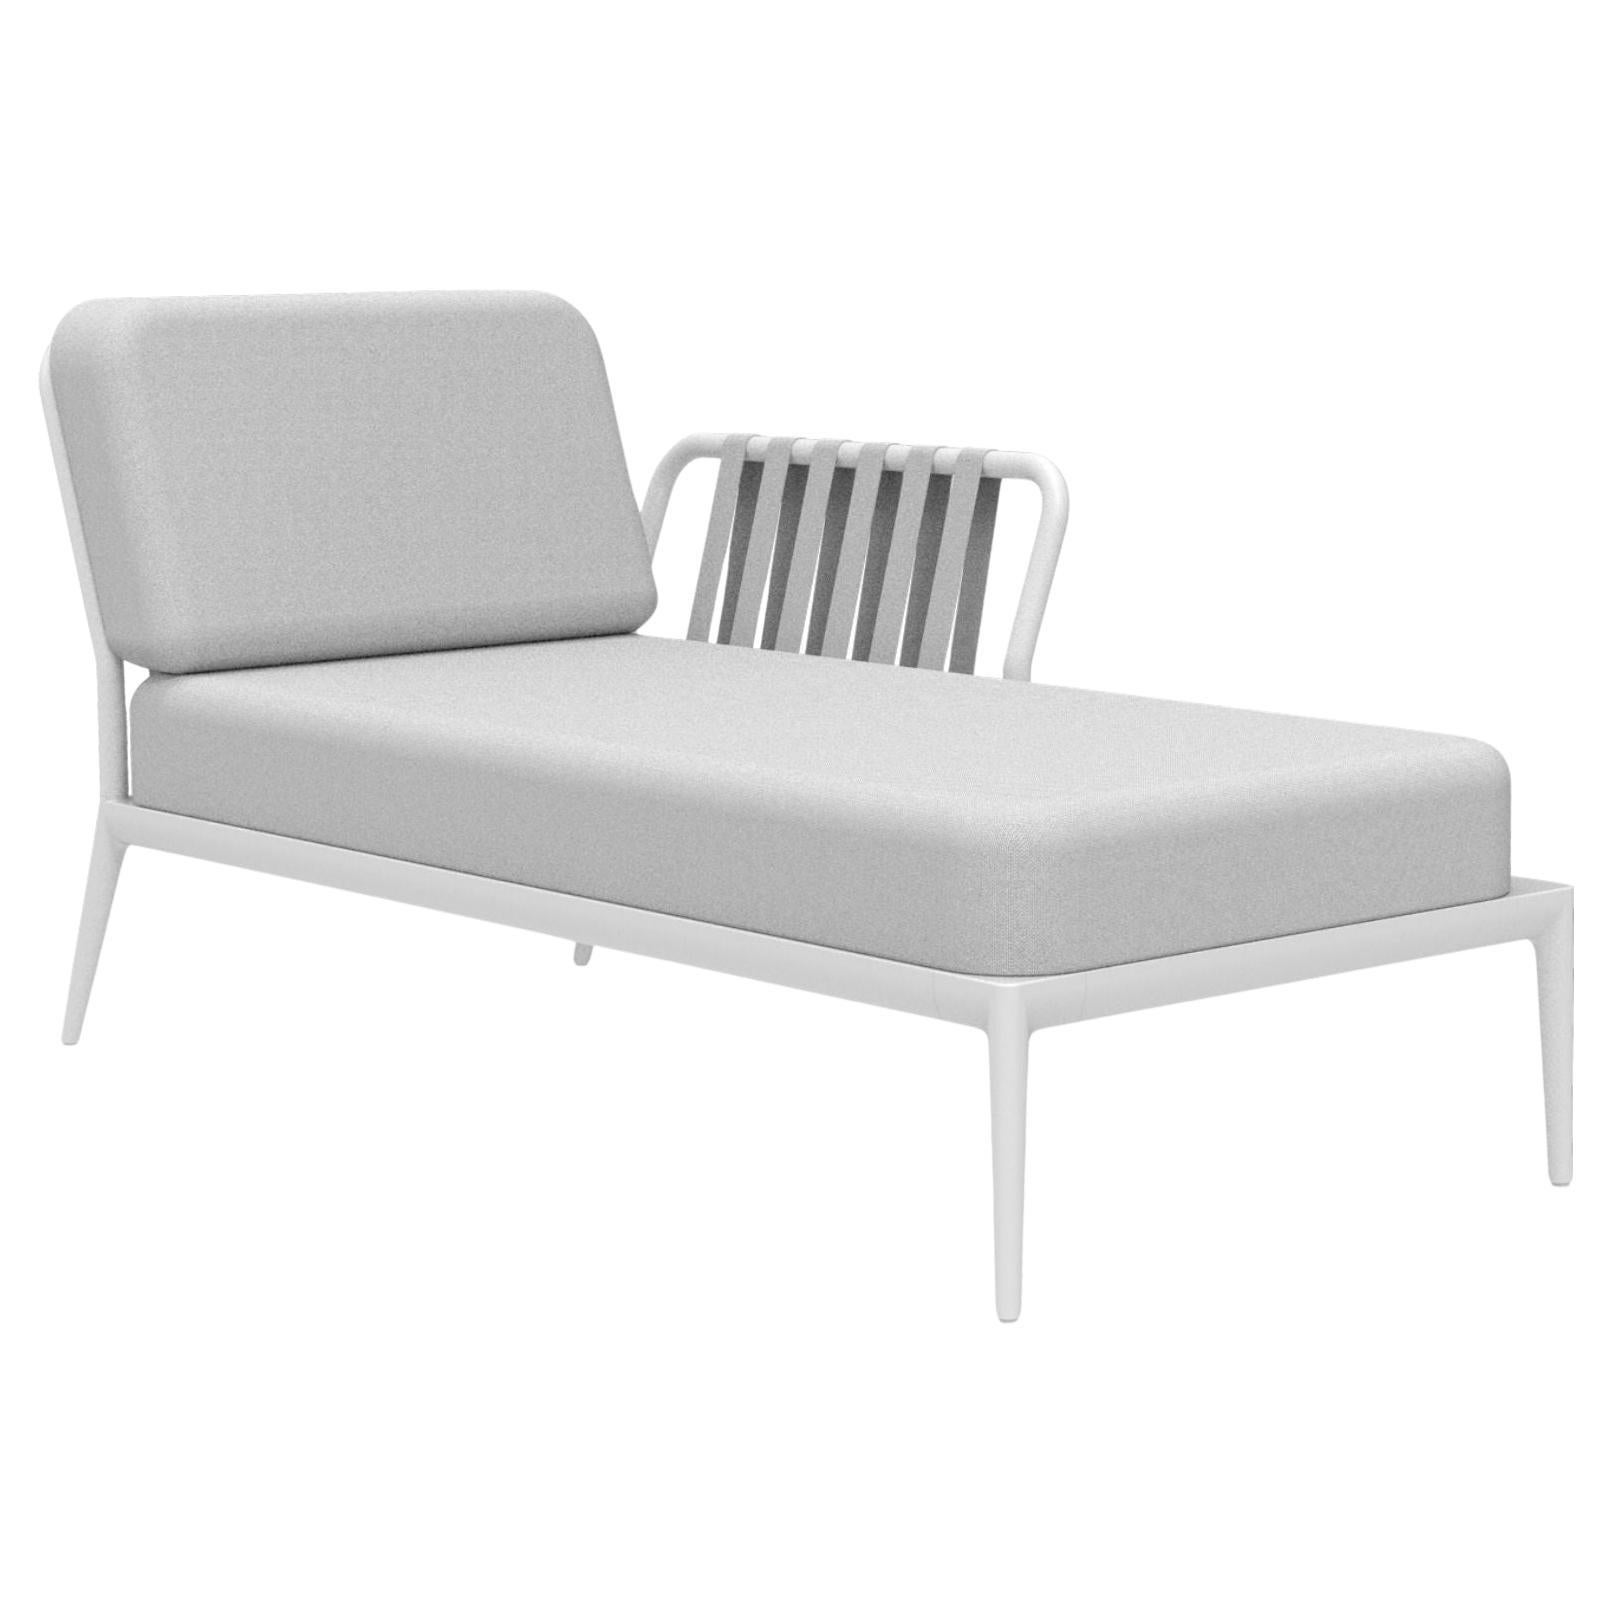 Ribbons White Left Chaise Lounge by Mowee For Sale